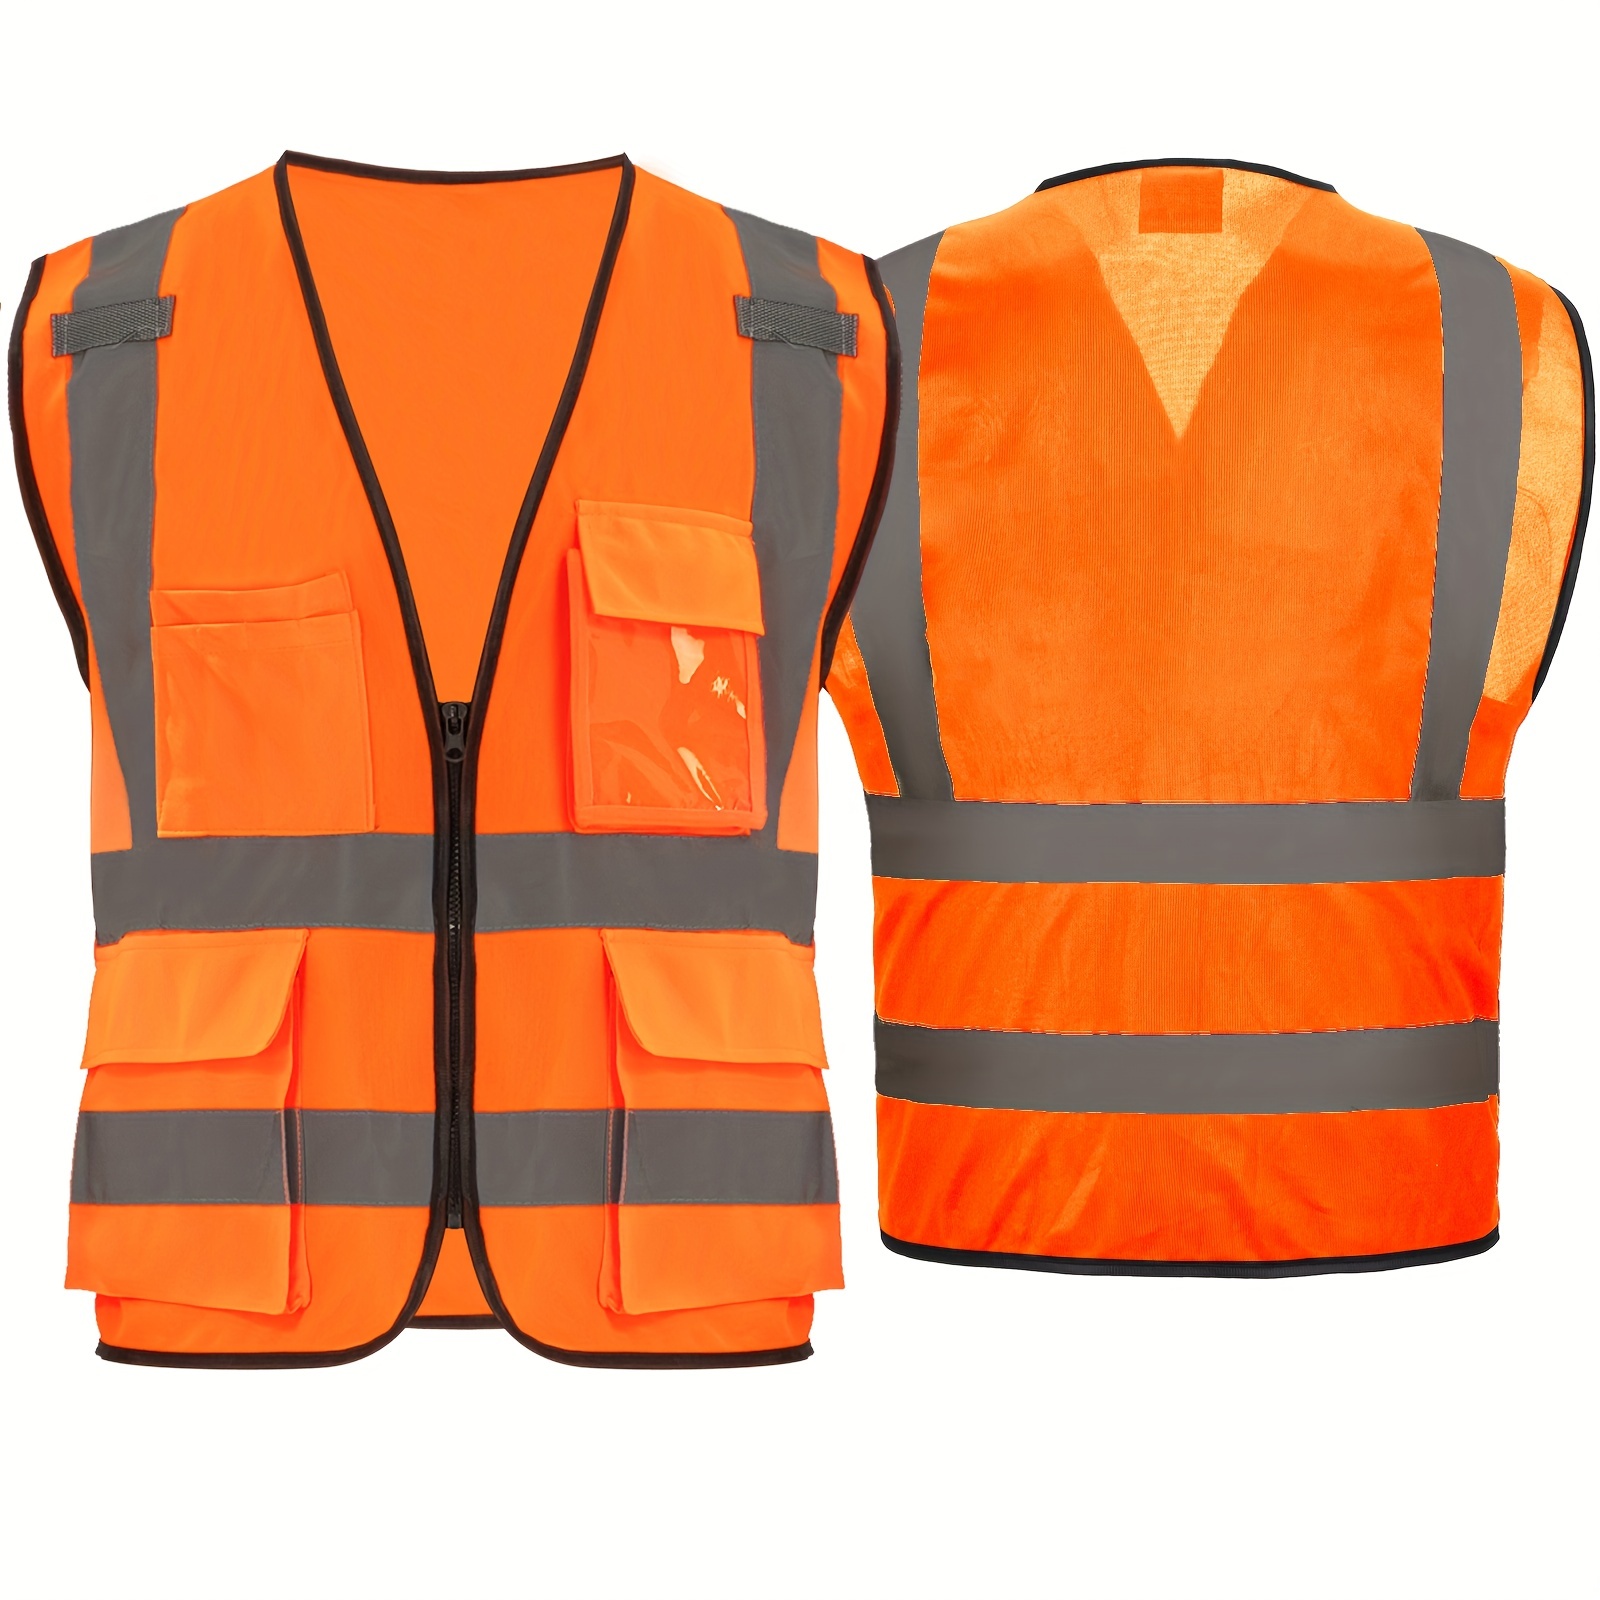 Reflective Safety Vest Orange Pockets Class Visibility Security with Zipper High Visibility Safety Vests with Reflective Strips ANSI/ISEA Standard